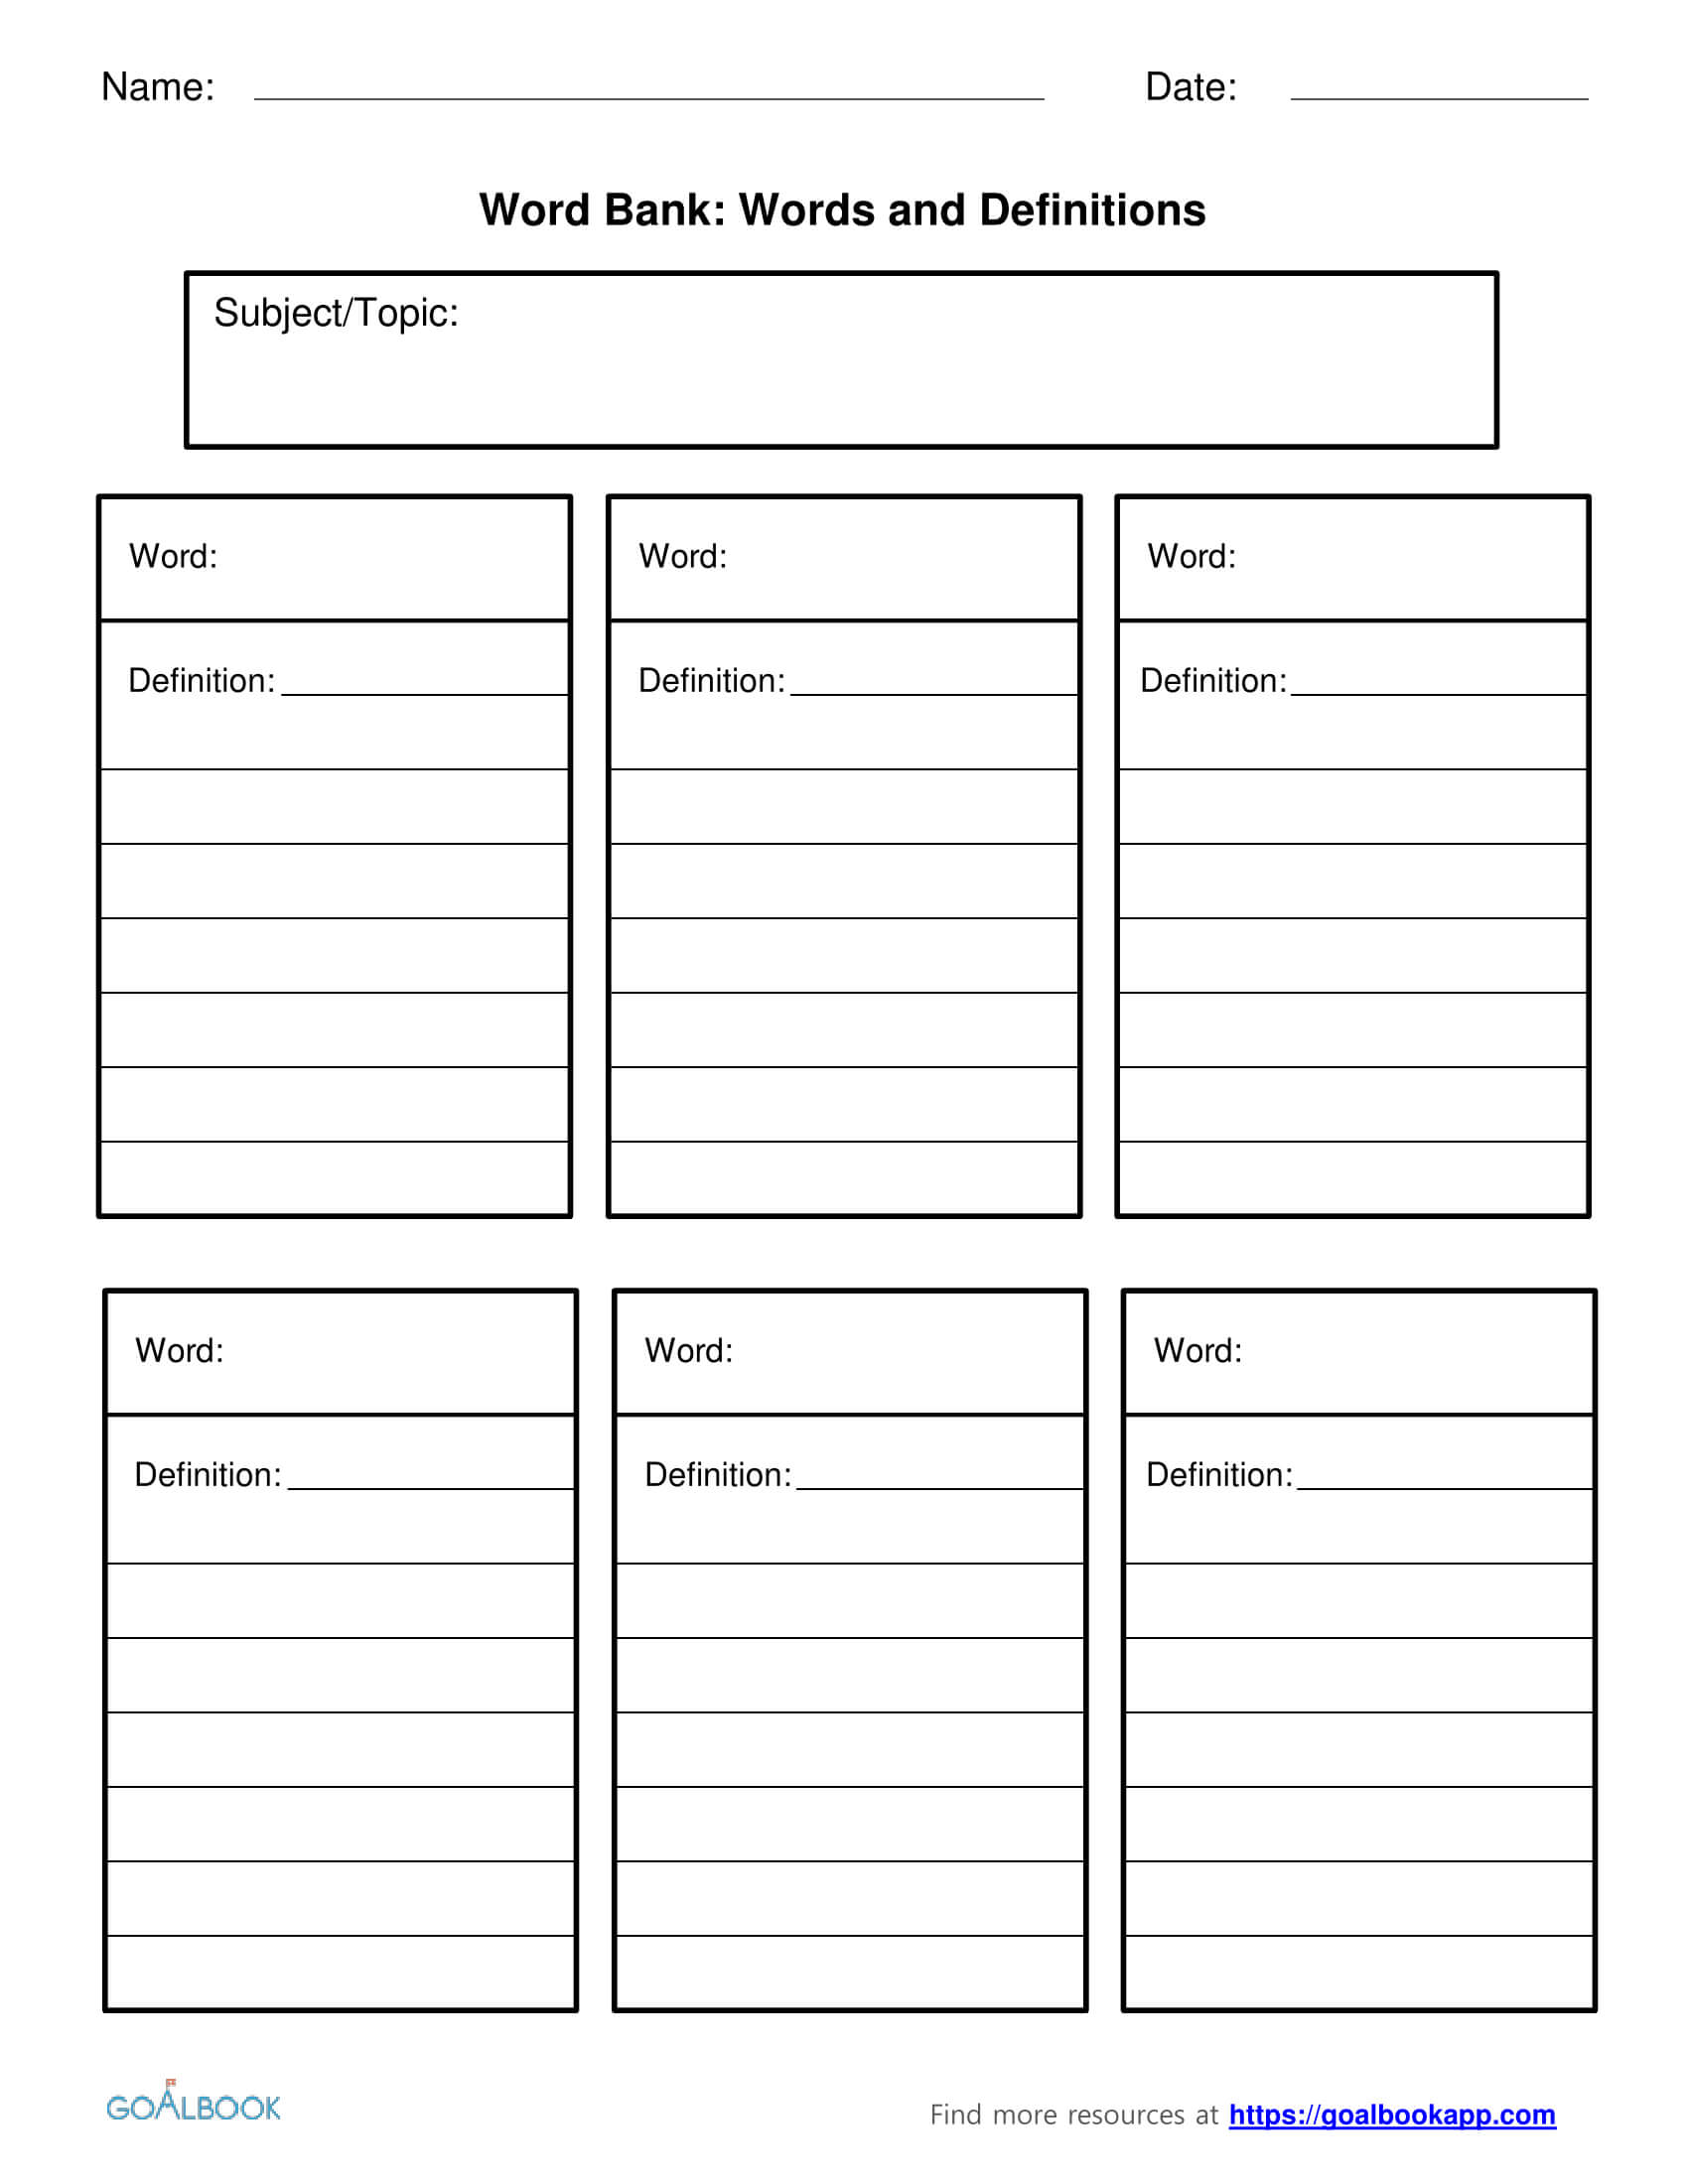 Word Bank | Udl Strategies – Goalbook Toolkit With Regard To Personal Word Wall Template